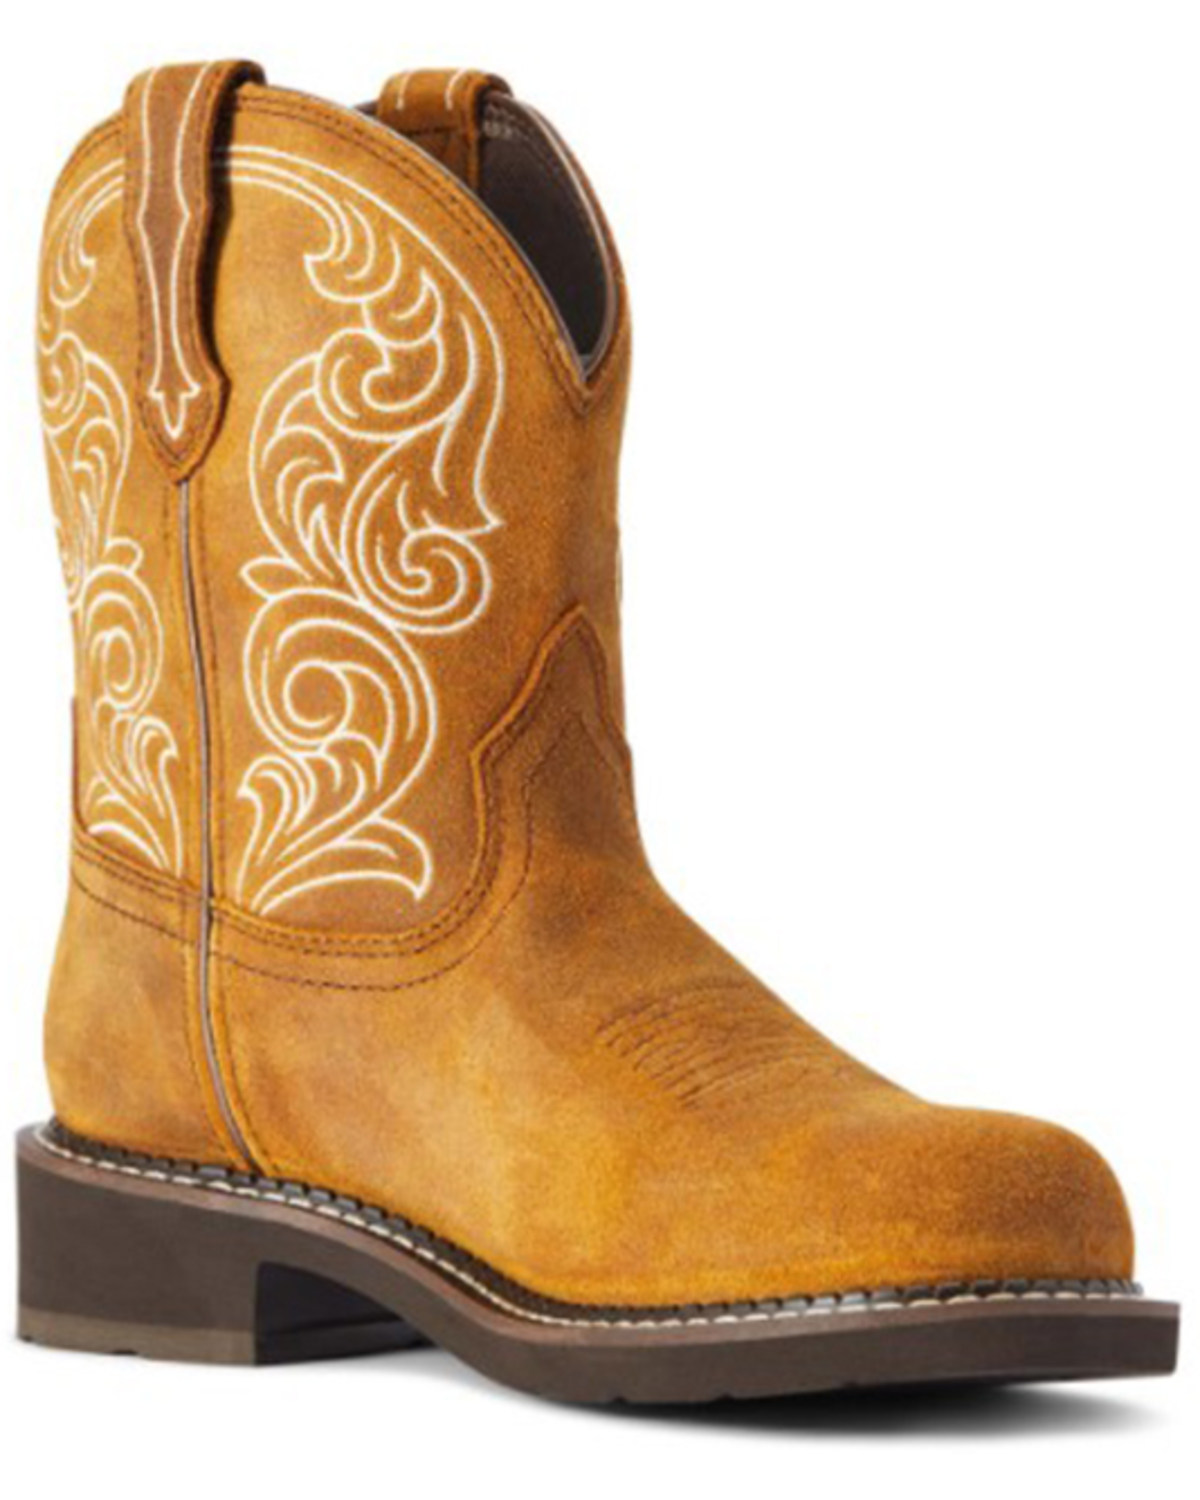 Ariat Women's Fatbaby Hertiage H20 Performance Western Boots - Round Toe